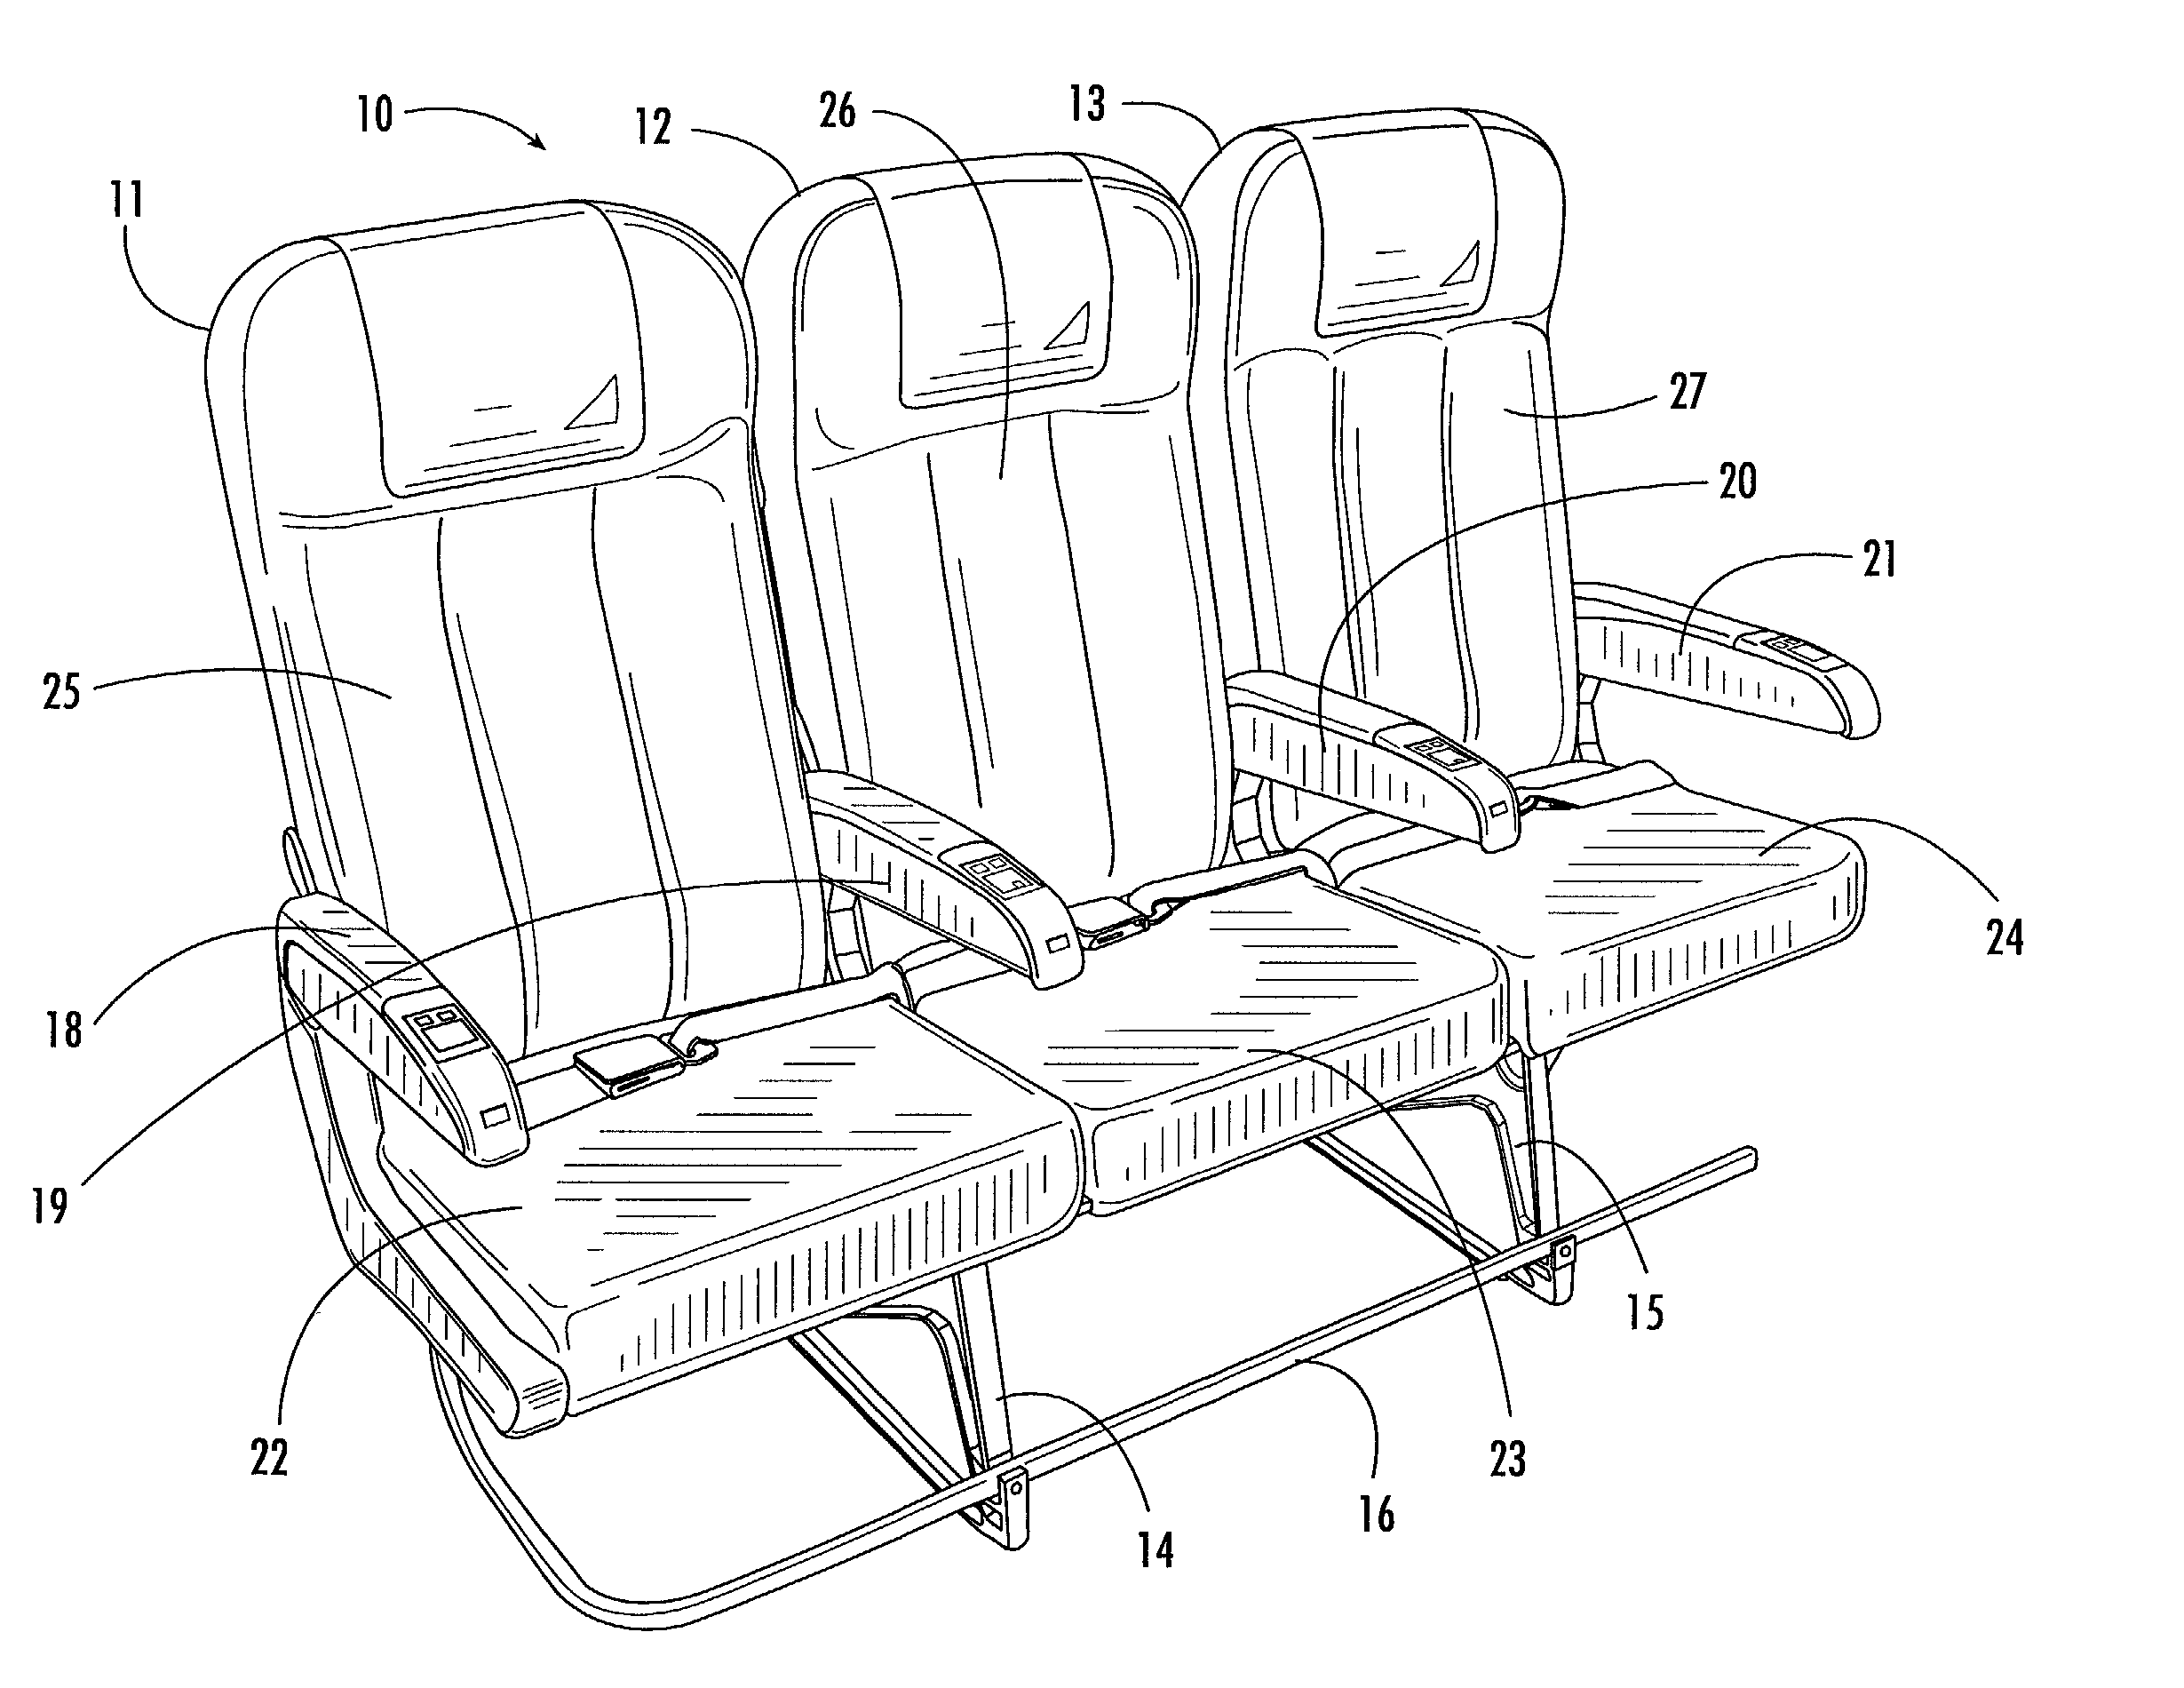 Passenger seat with low profile seat back recline locking assembly